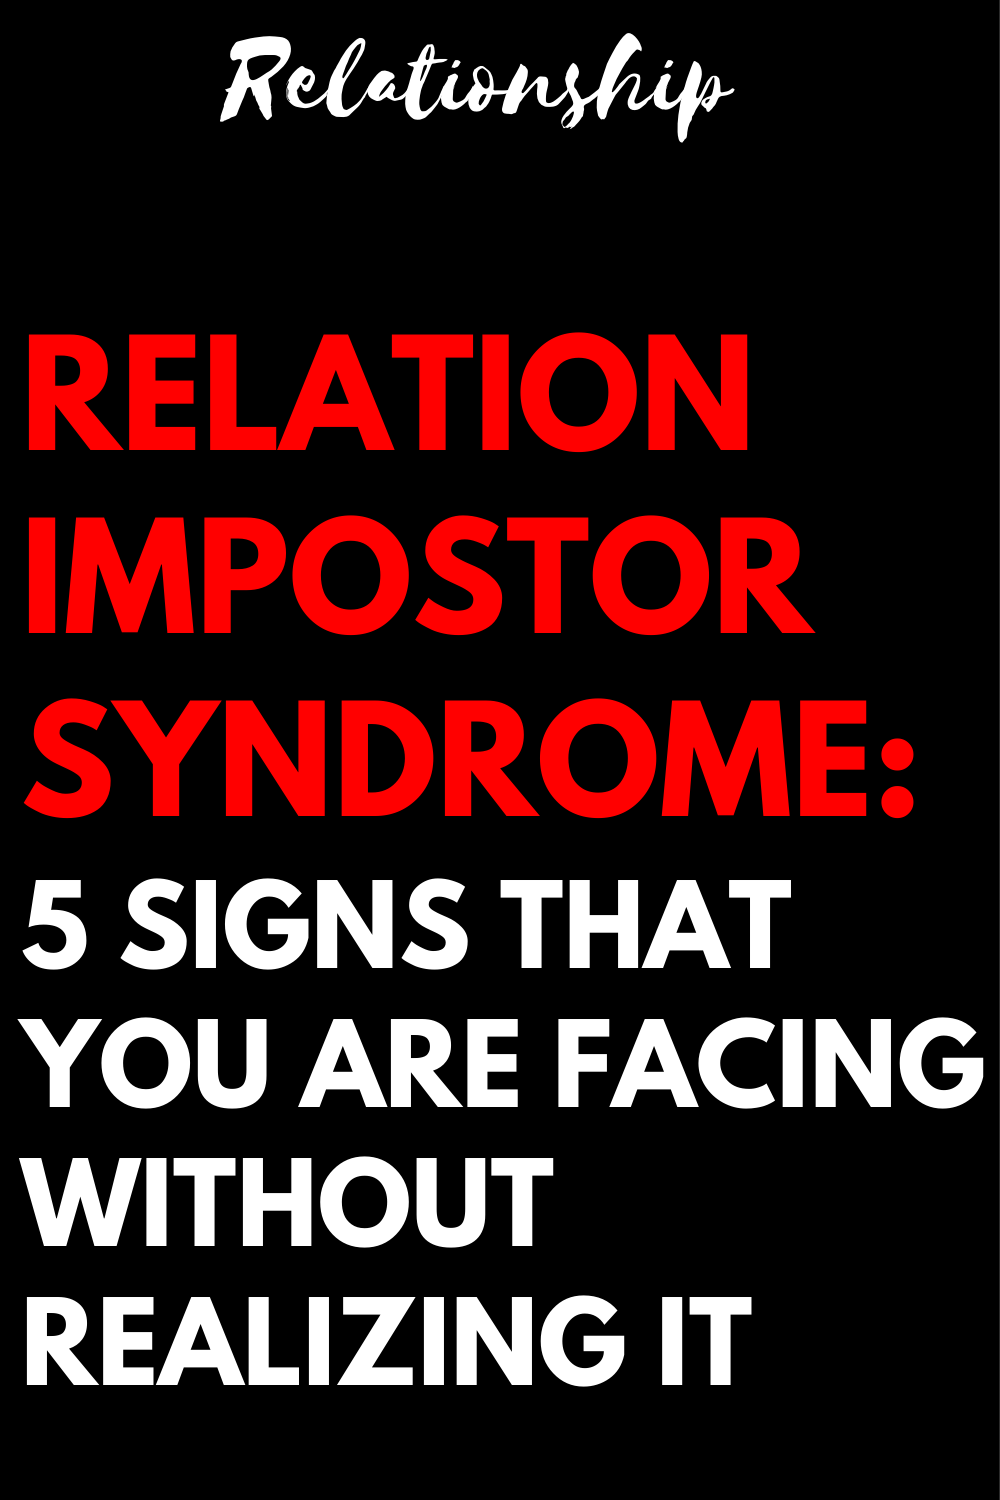 Relation impostor syndrome: 5 signs that you are facing without realizing it